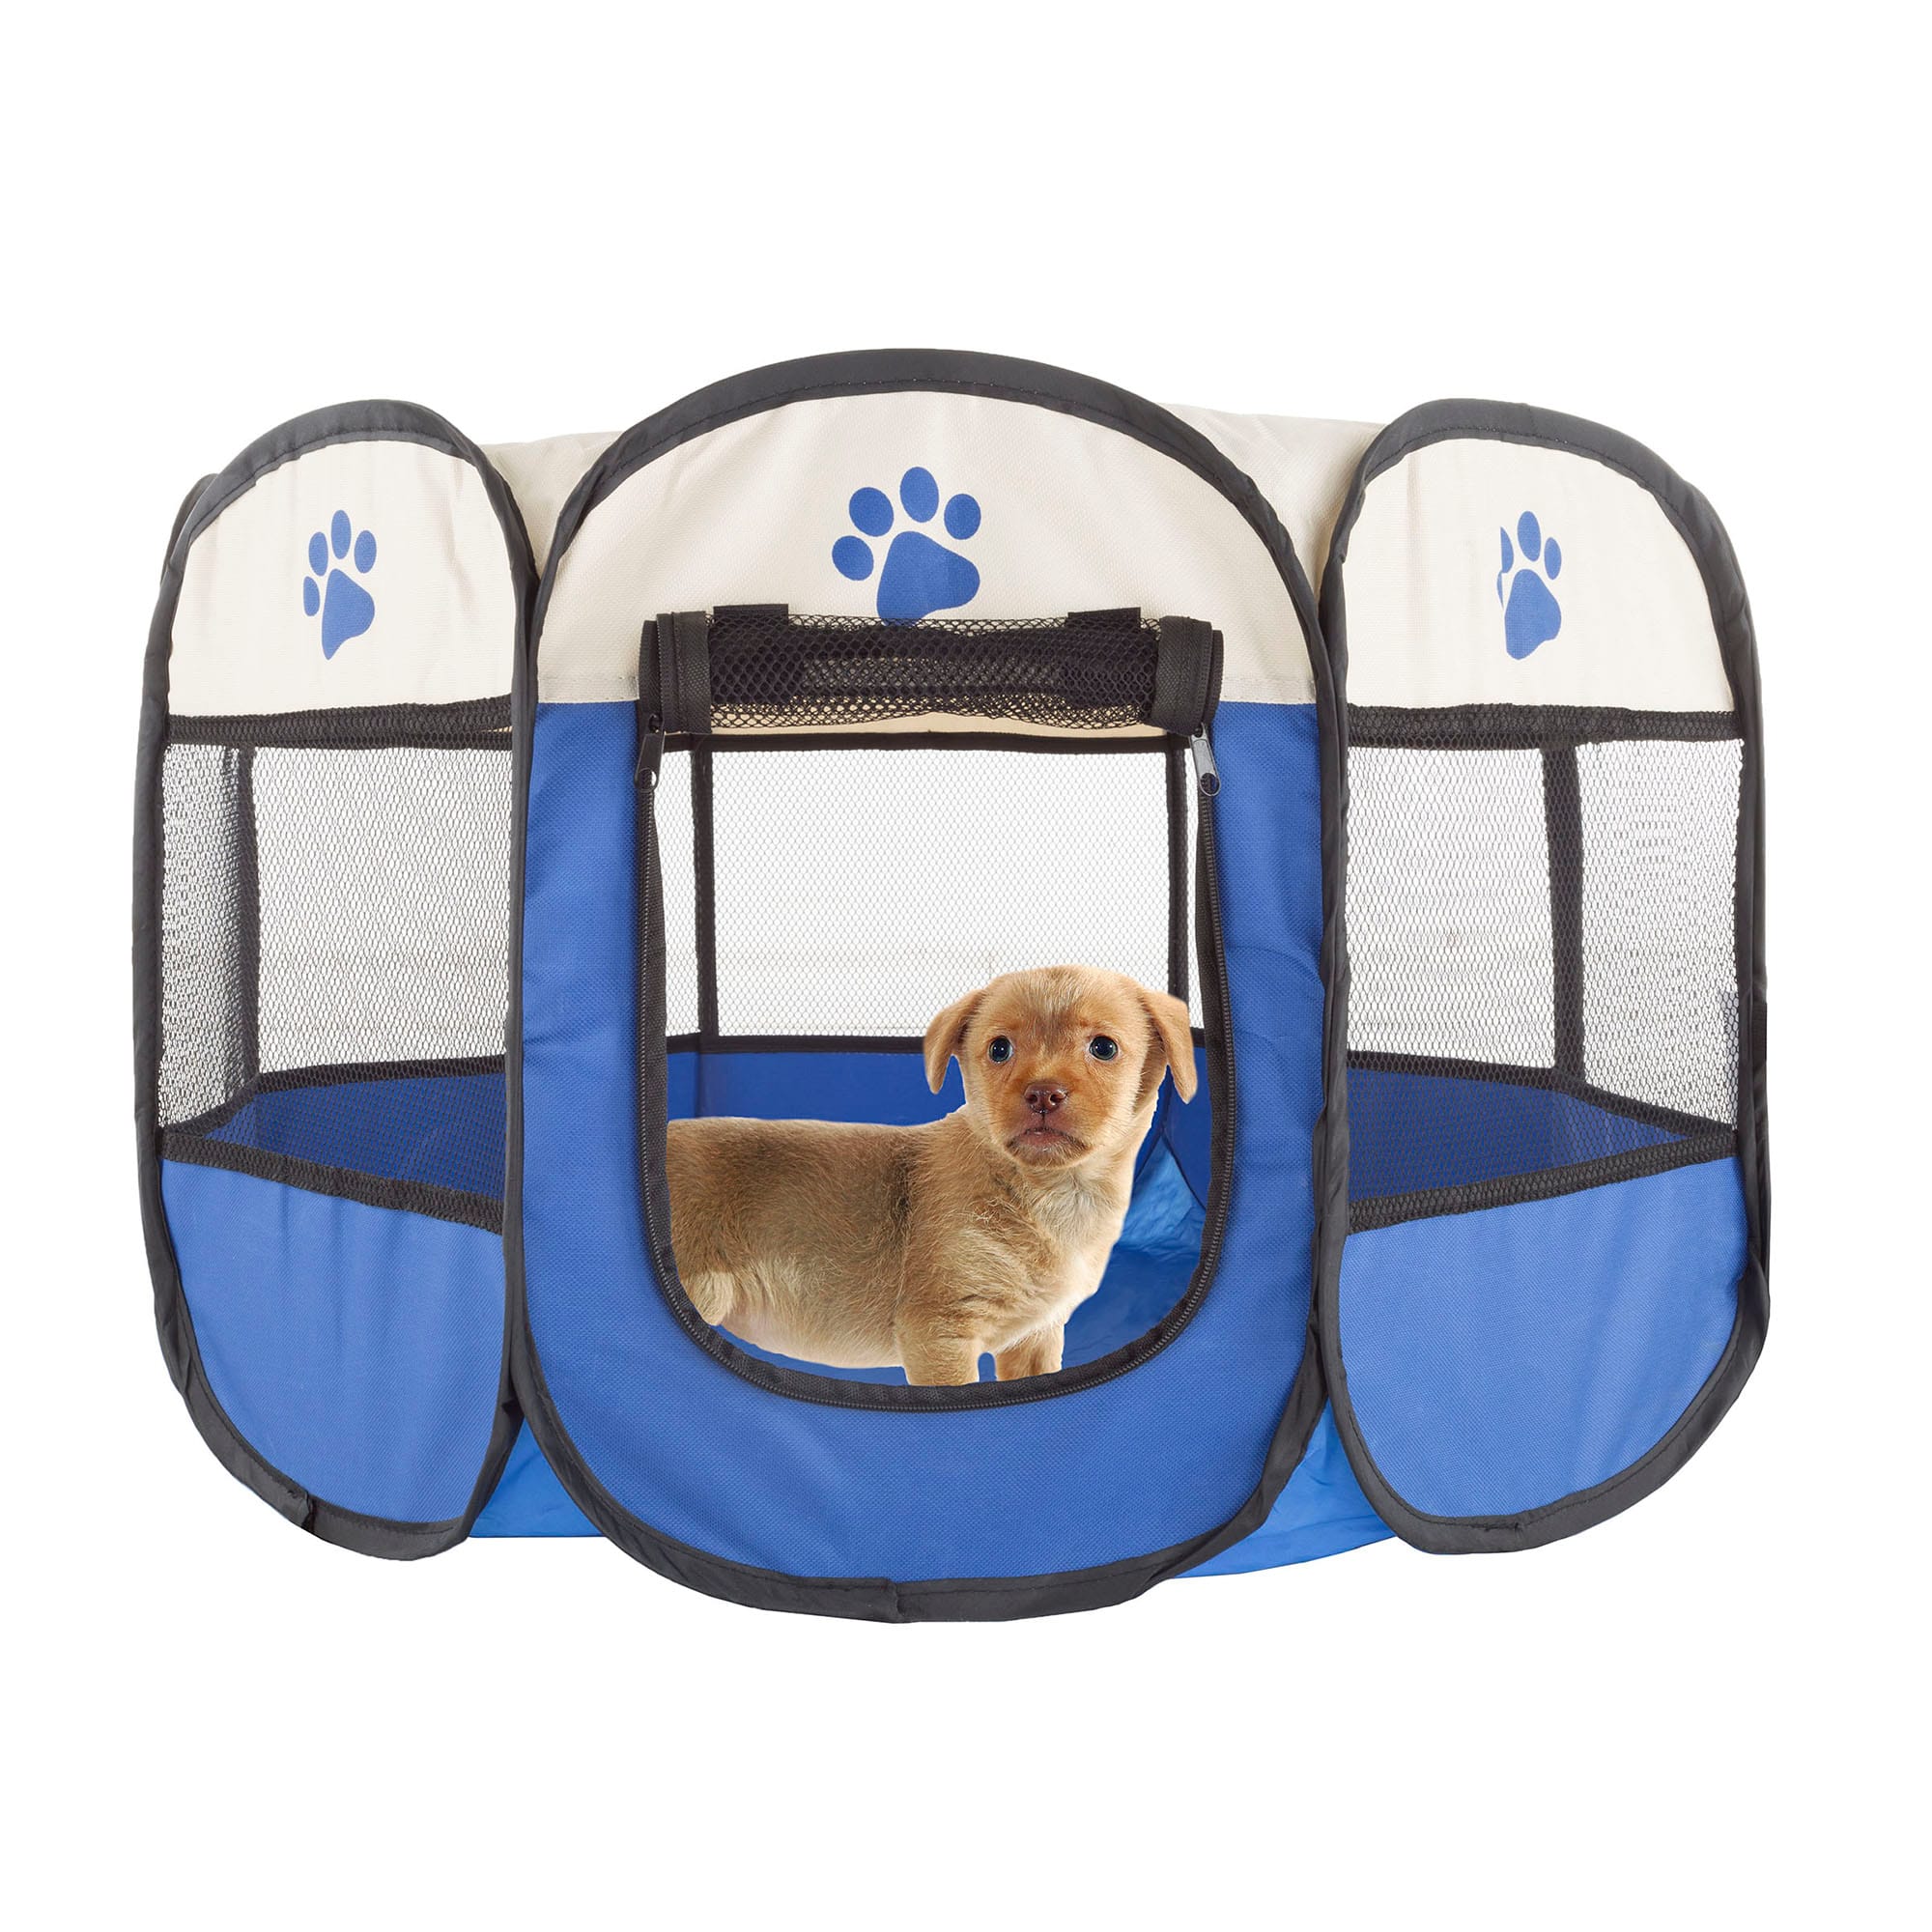 PETMAKER Pet Playpen with Carrying Case for Indoor/Outdoor Use, 26.5" L X  26.5" W X 17" H | Petco